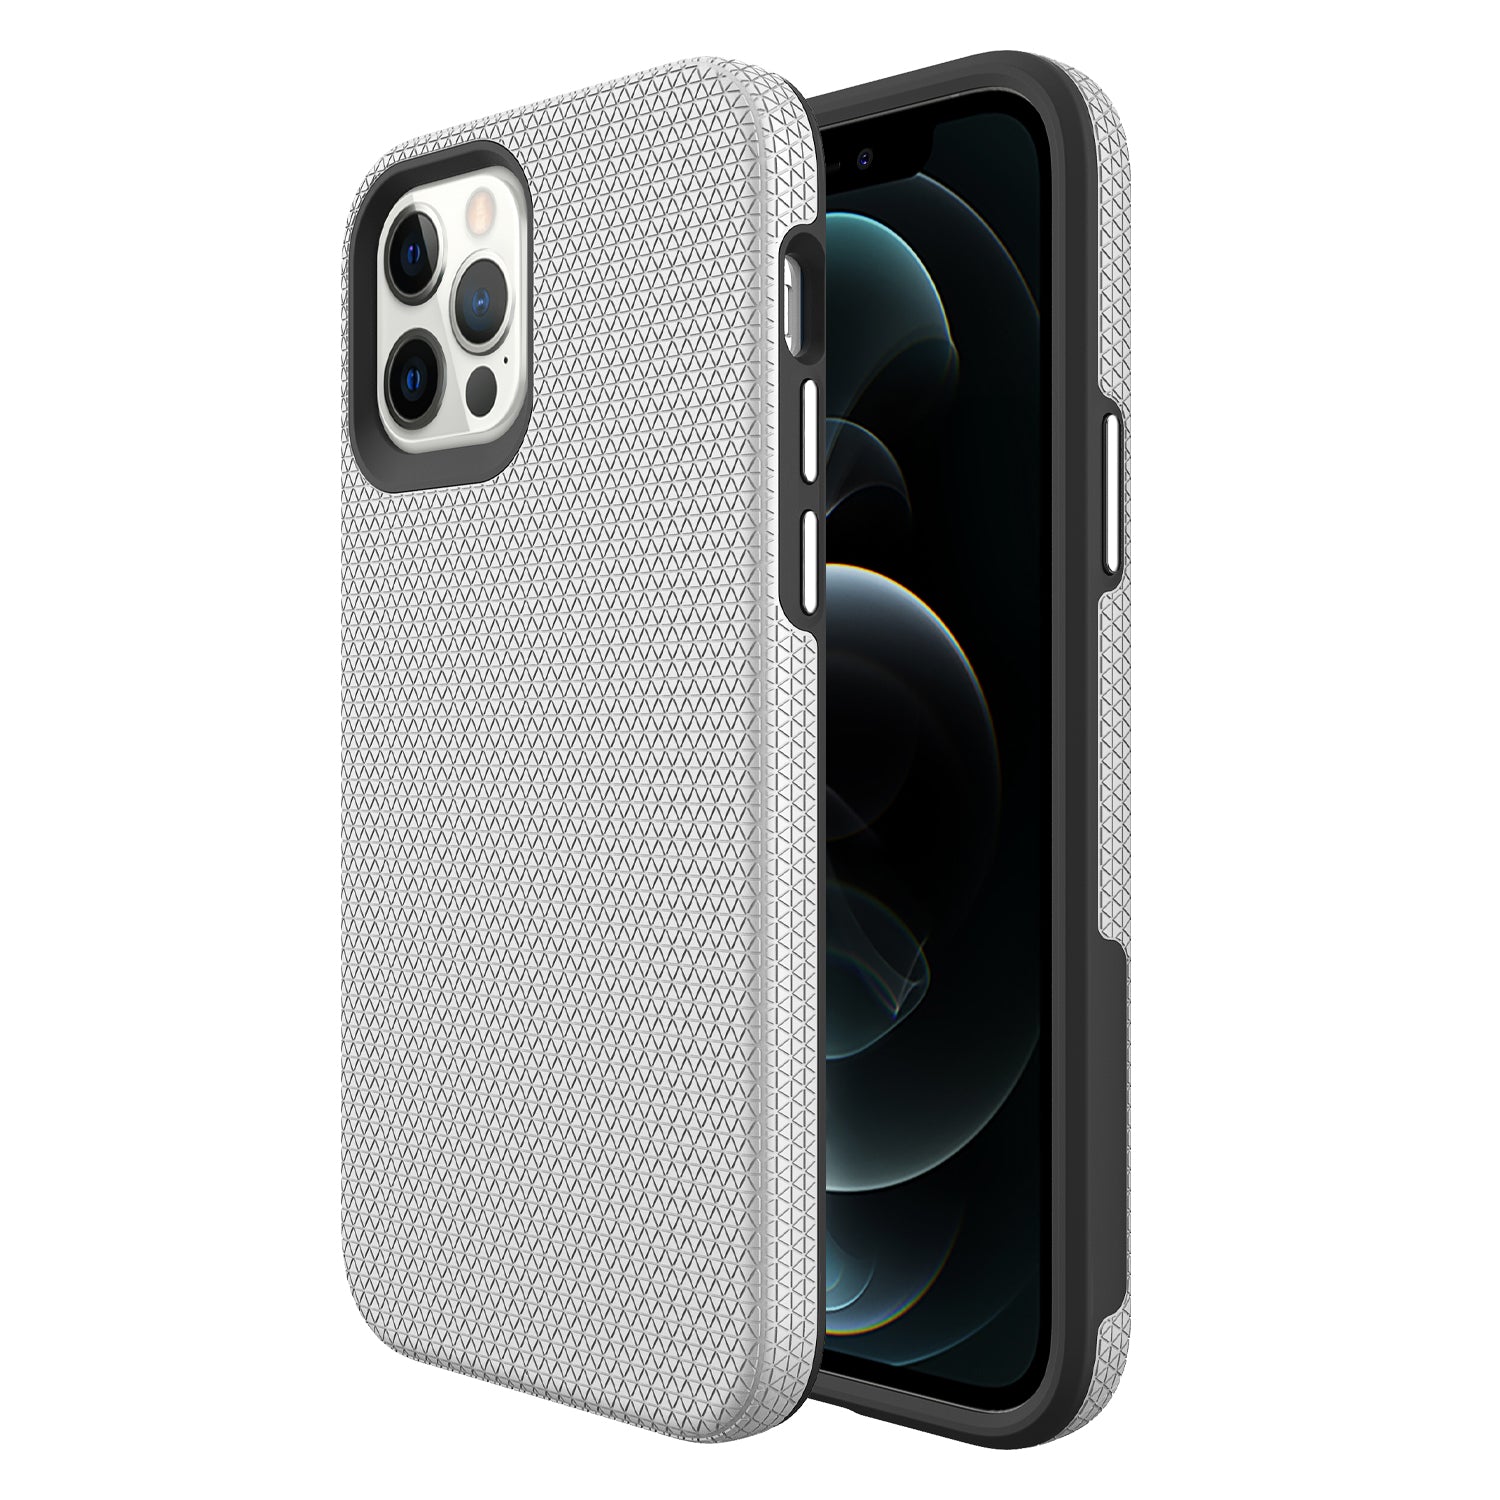 ZEOS Sphinx Dual Layer Case for iPhone 12 Pro Max